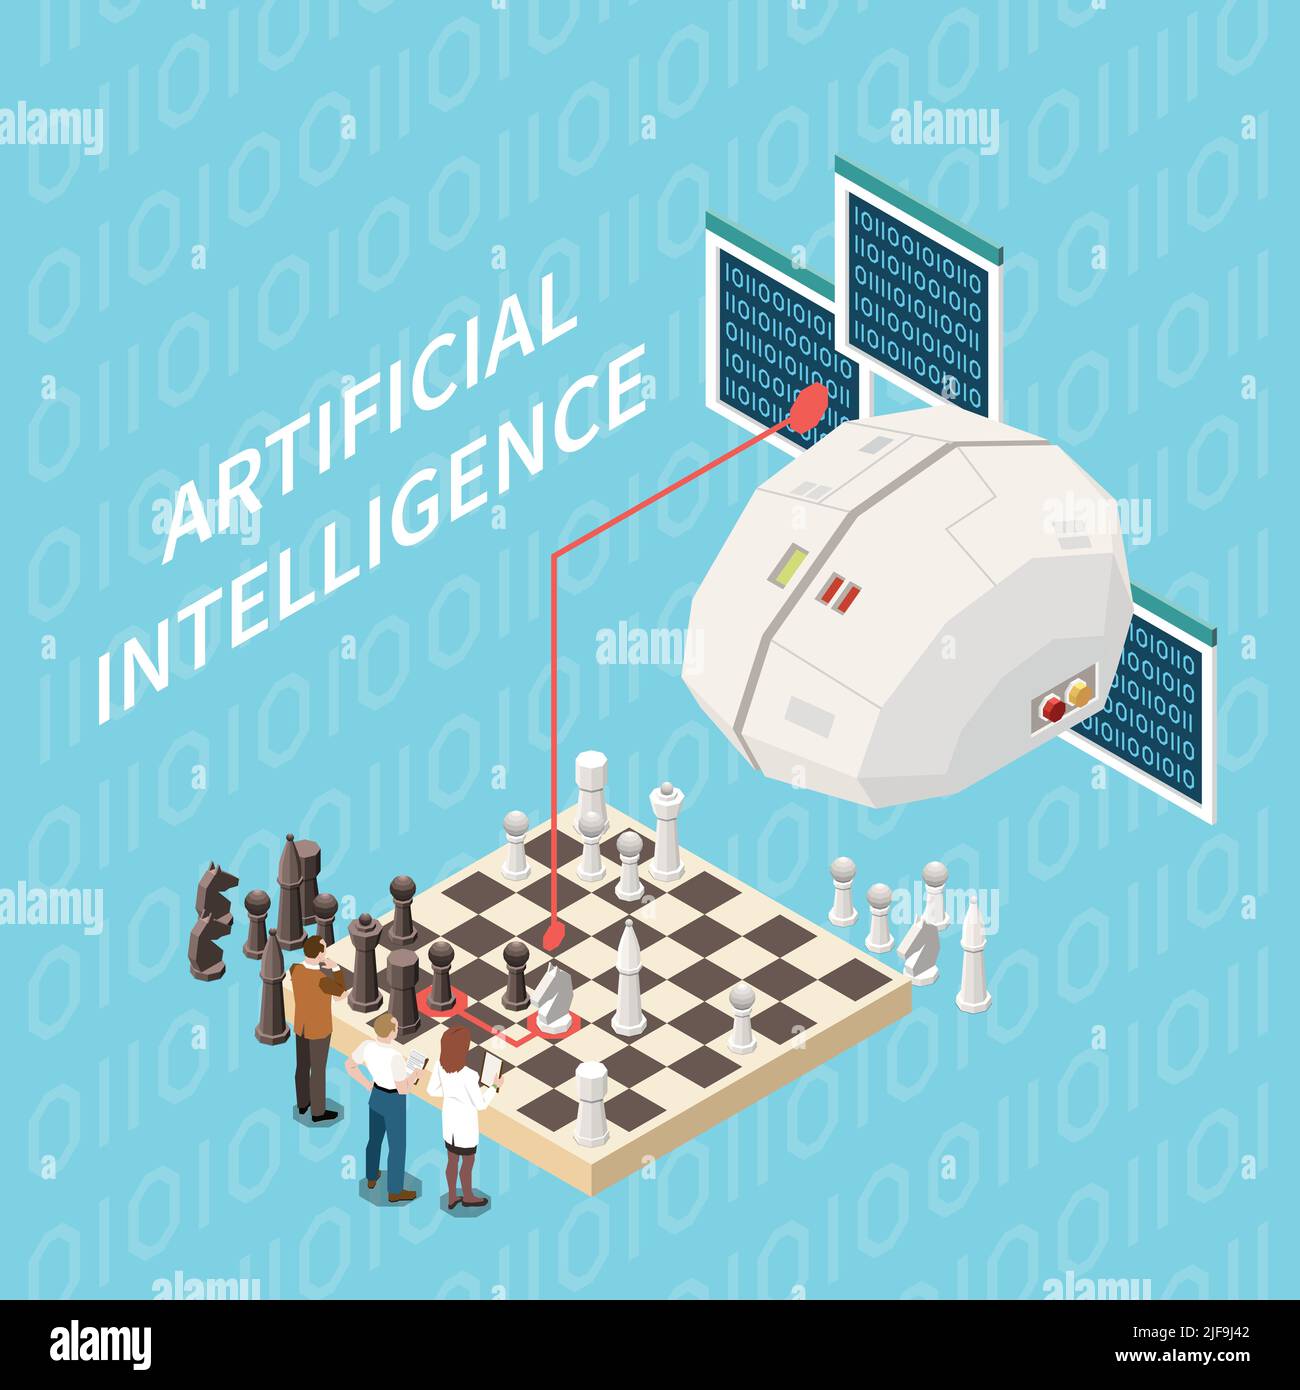 Artificial intelligence isometric composition with tech brain image playing chess with group of scientists with text vector illustration Stock Vector